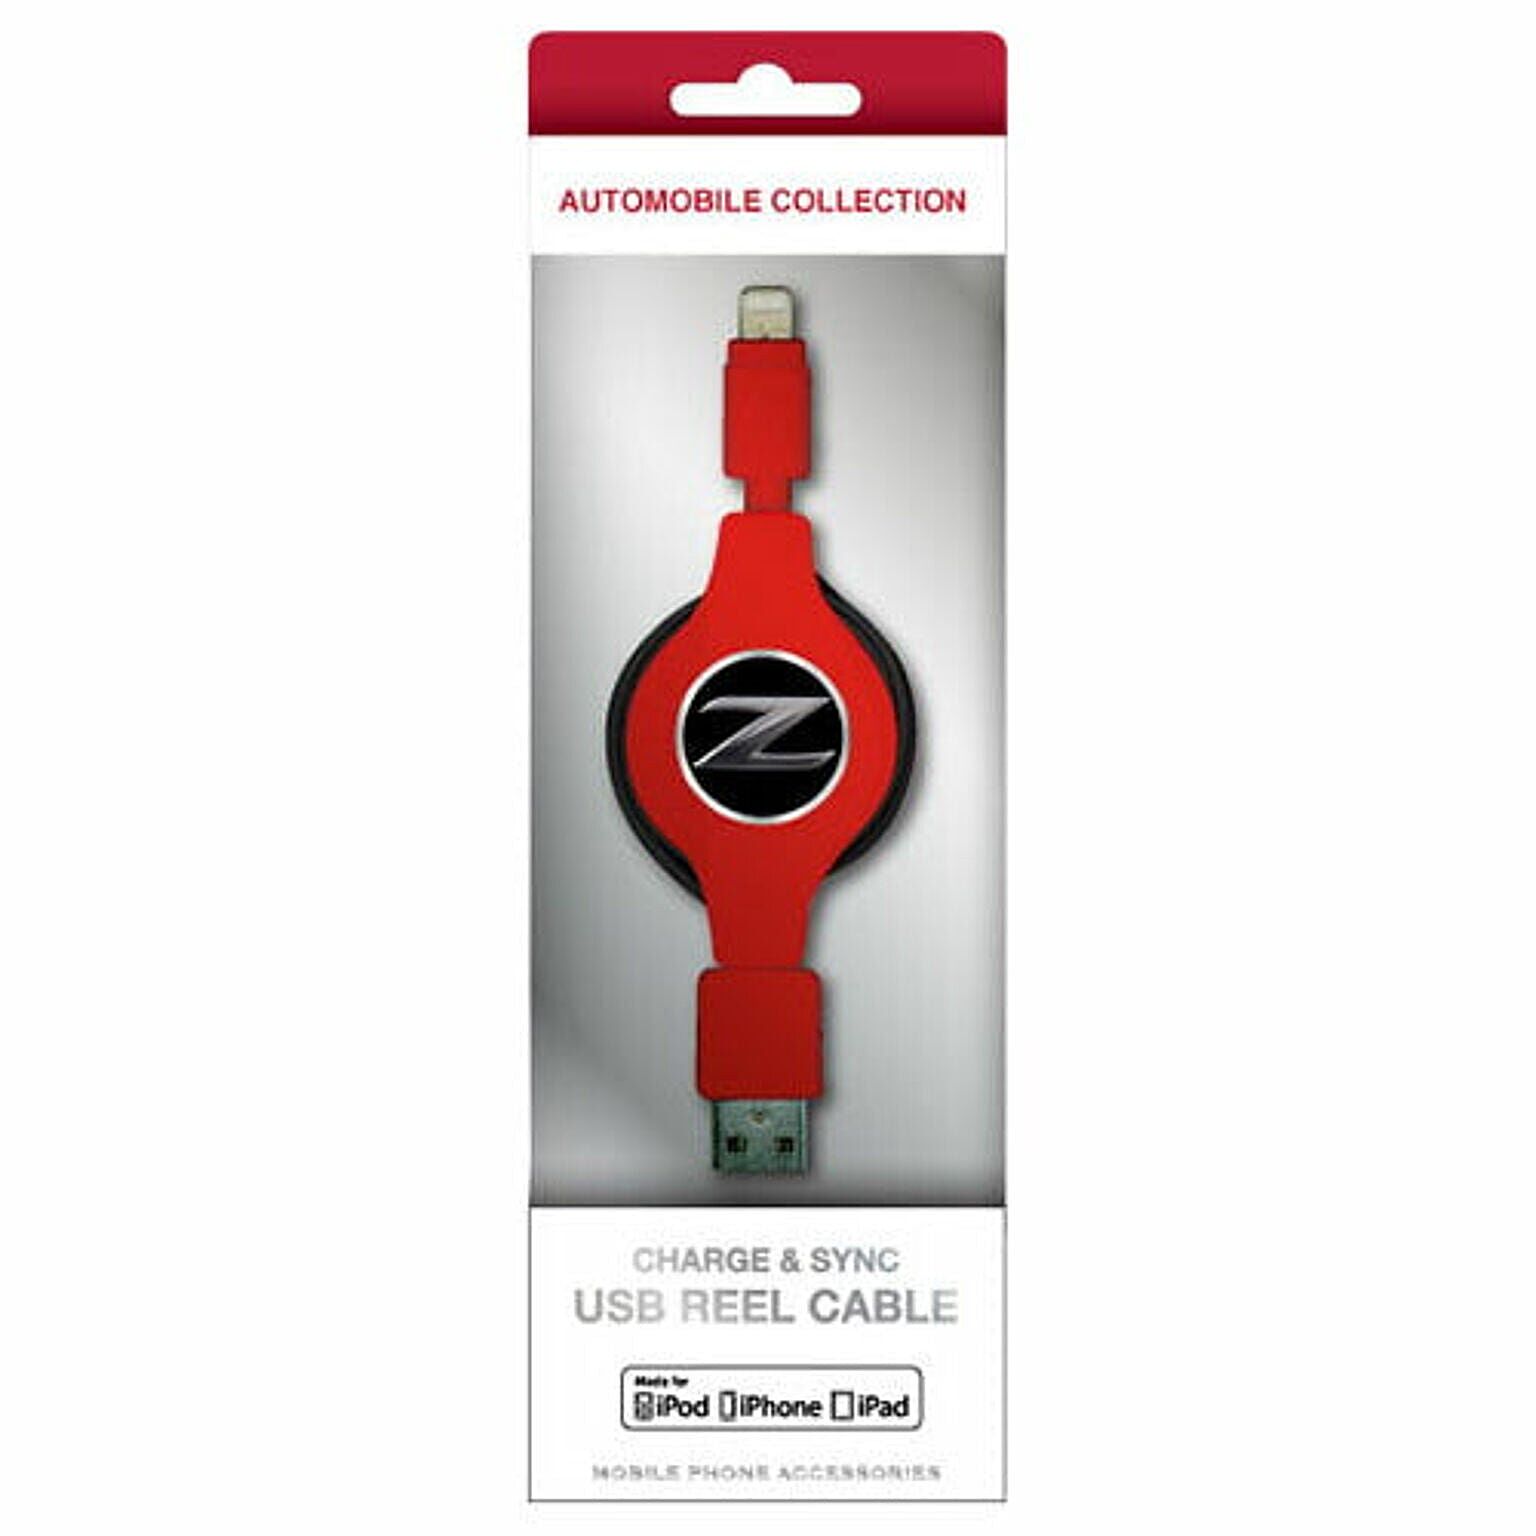 NISSAN 公式ライセンス品 FAIRLADY Z CHARGE & SYNC USB REEL CABLE FOR IPHONE RED NZMUJ-R1RD